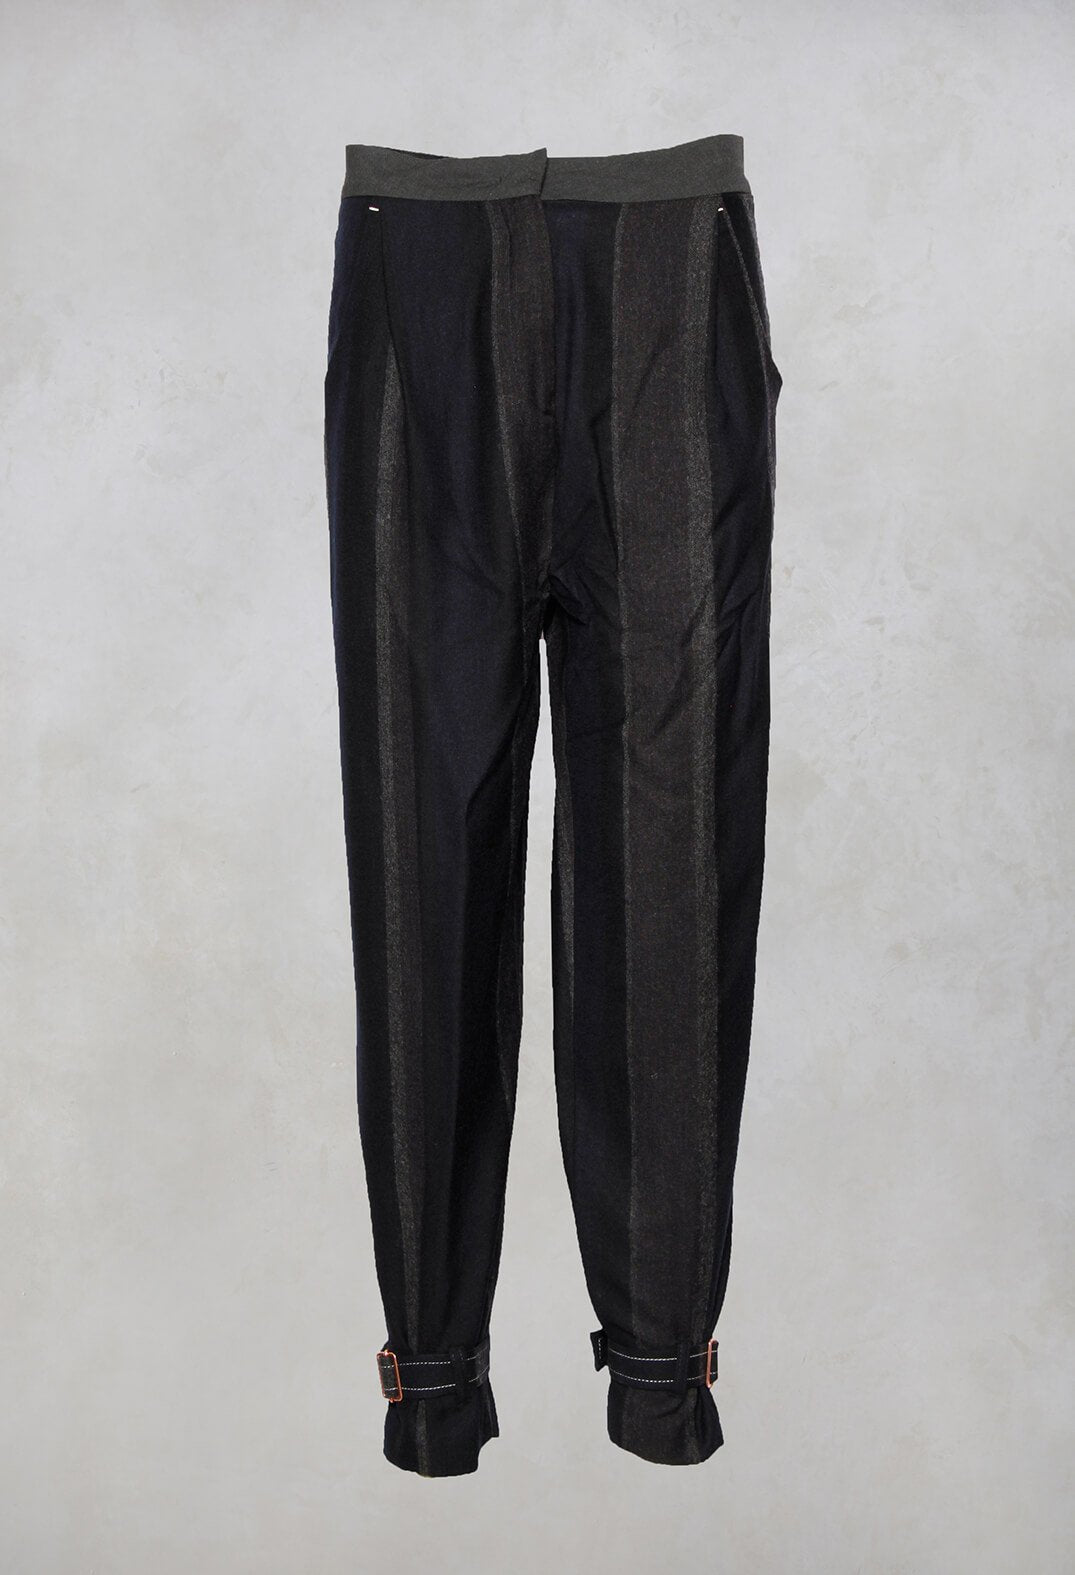 striped black trousers with cuffs